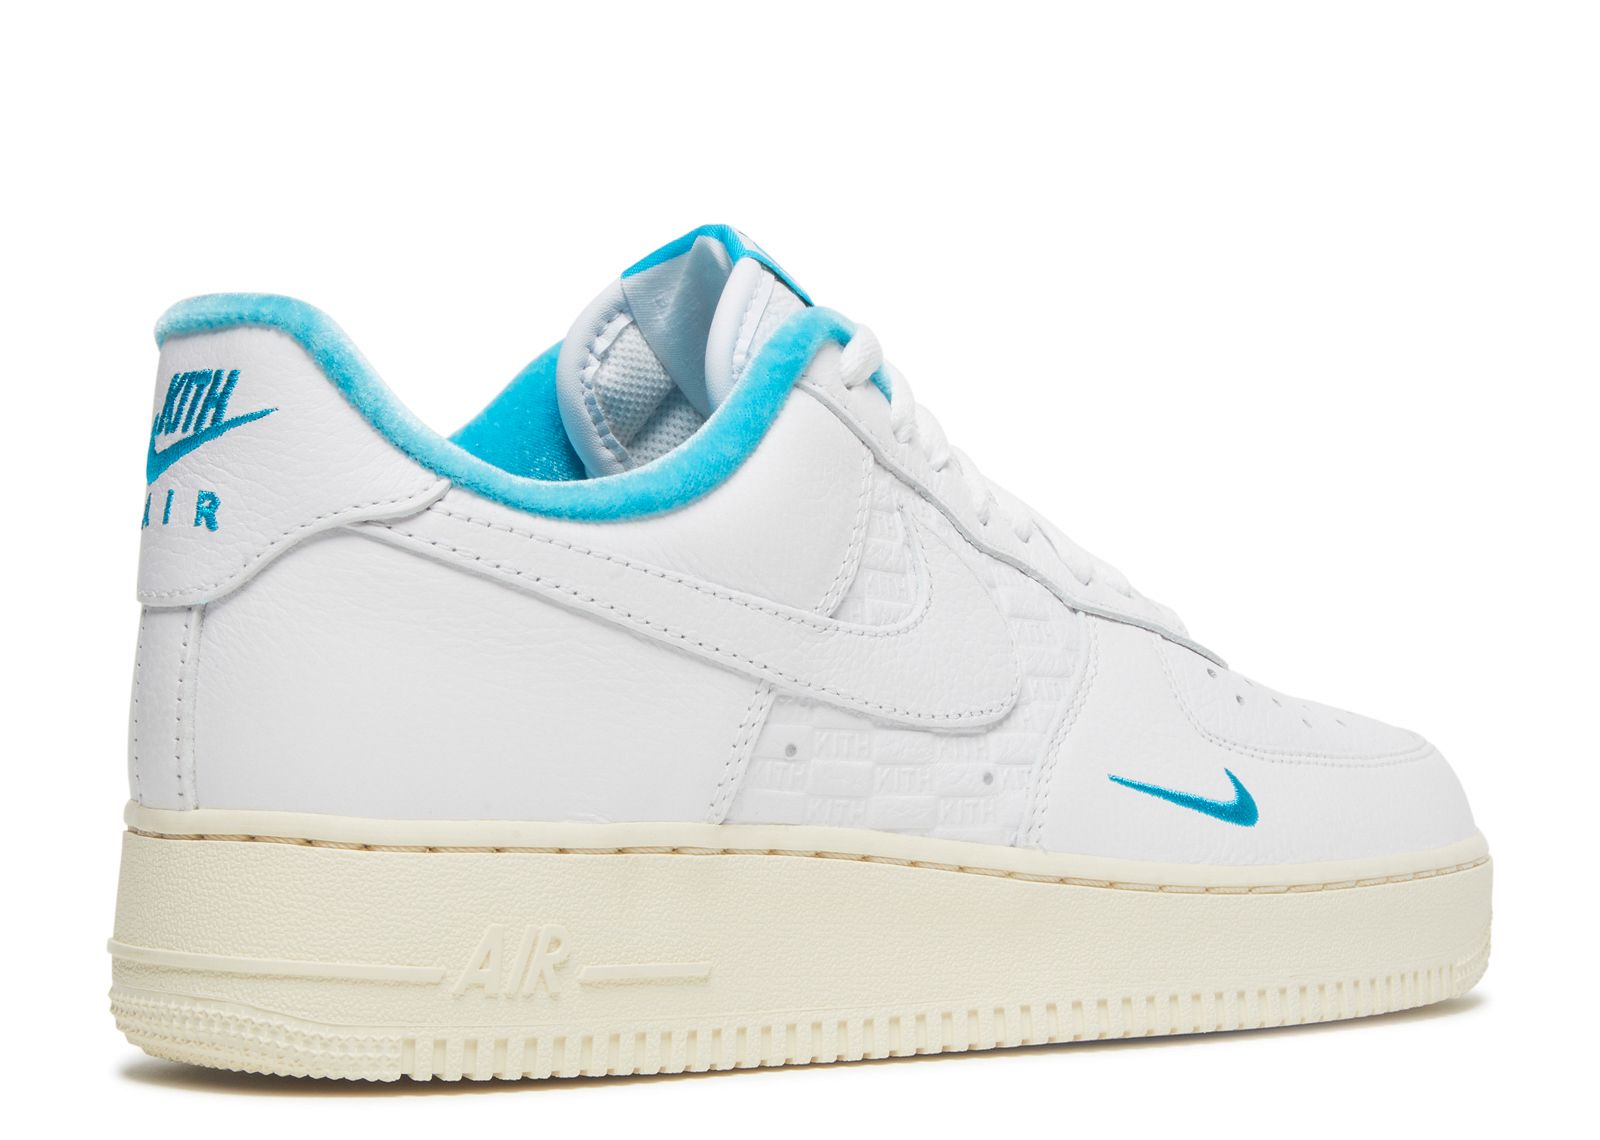 KITH X Air Force 1 Low 'Hawaii' - Nike - DC9555 100 - white/blue 